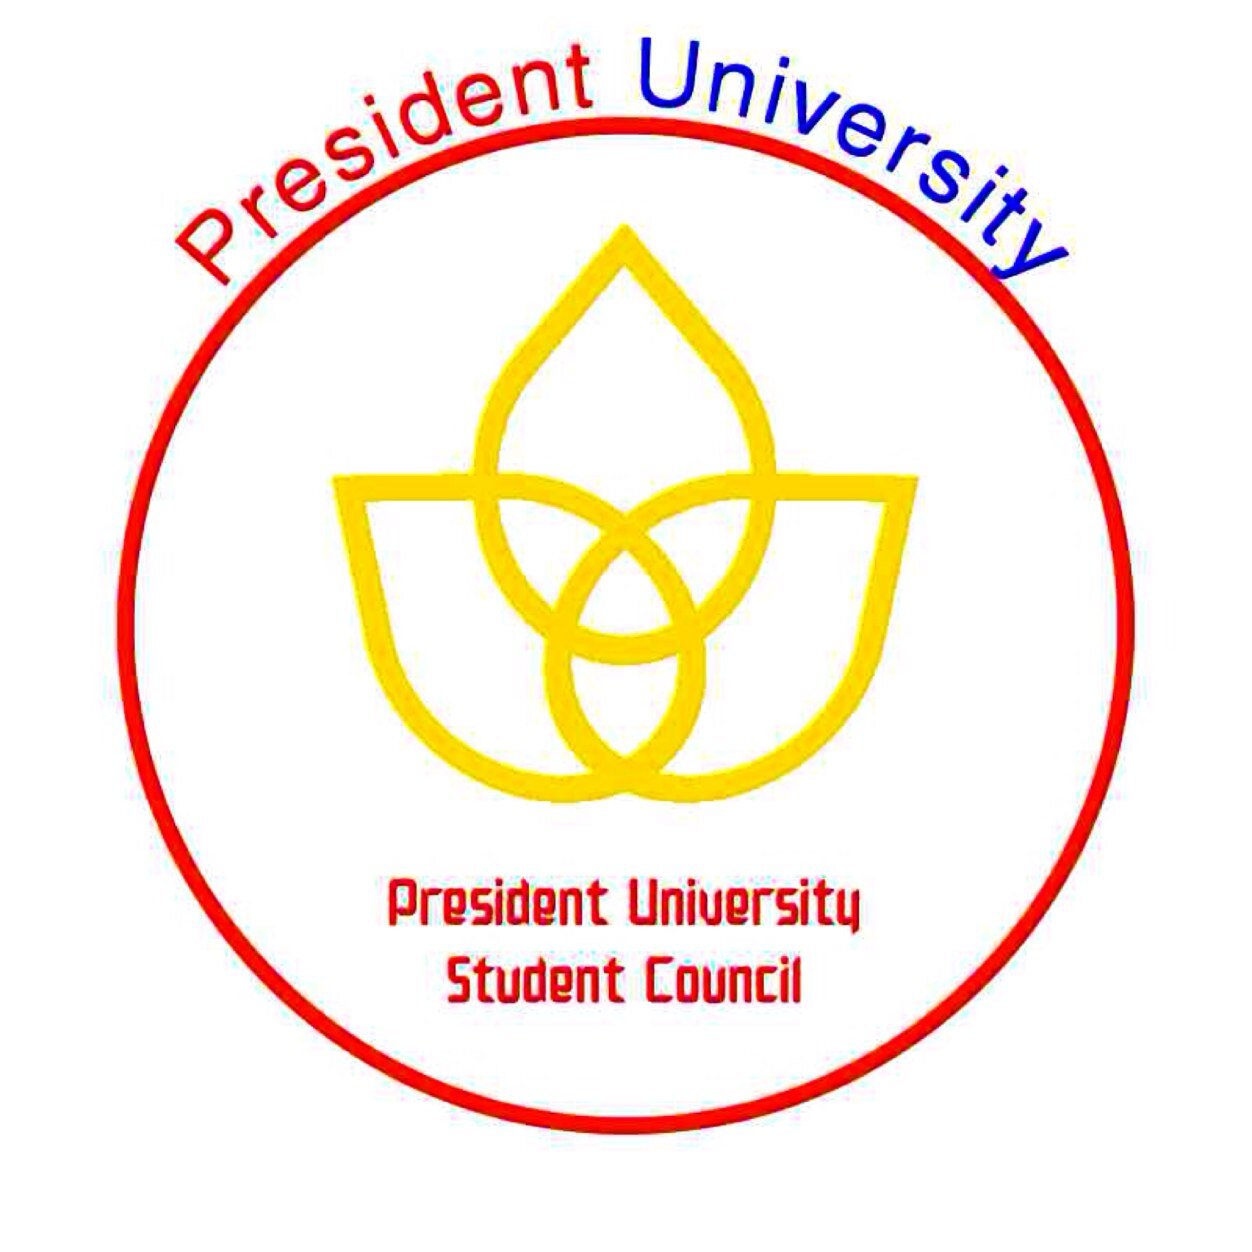 Official Account of President University Student Council | Email: pusc@president.ac.id | Instagram: @pusc_presuniv | Line@: @uhk9253i